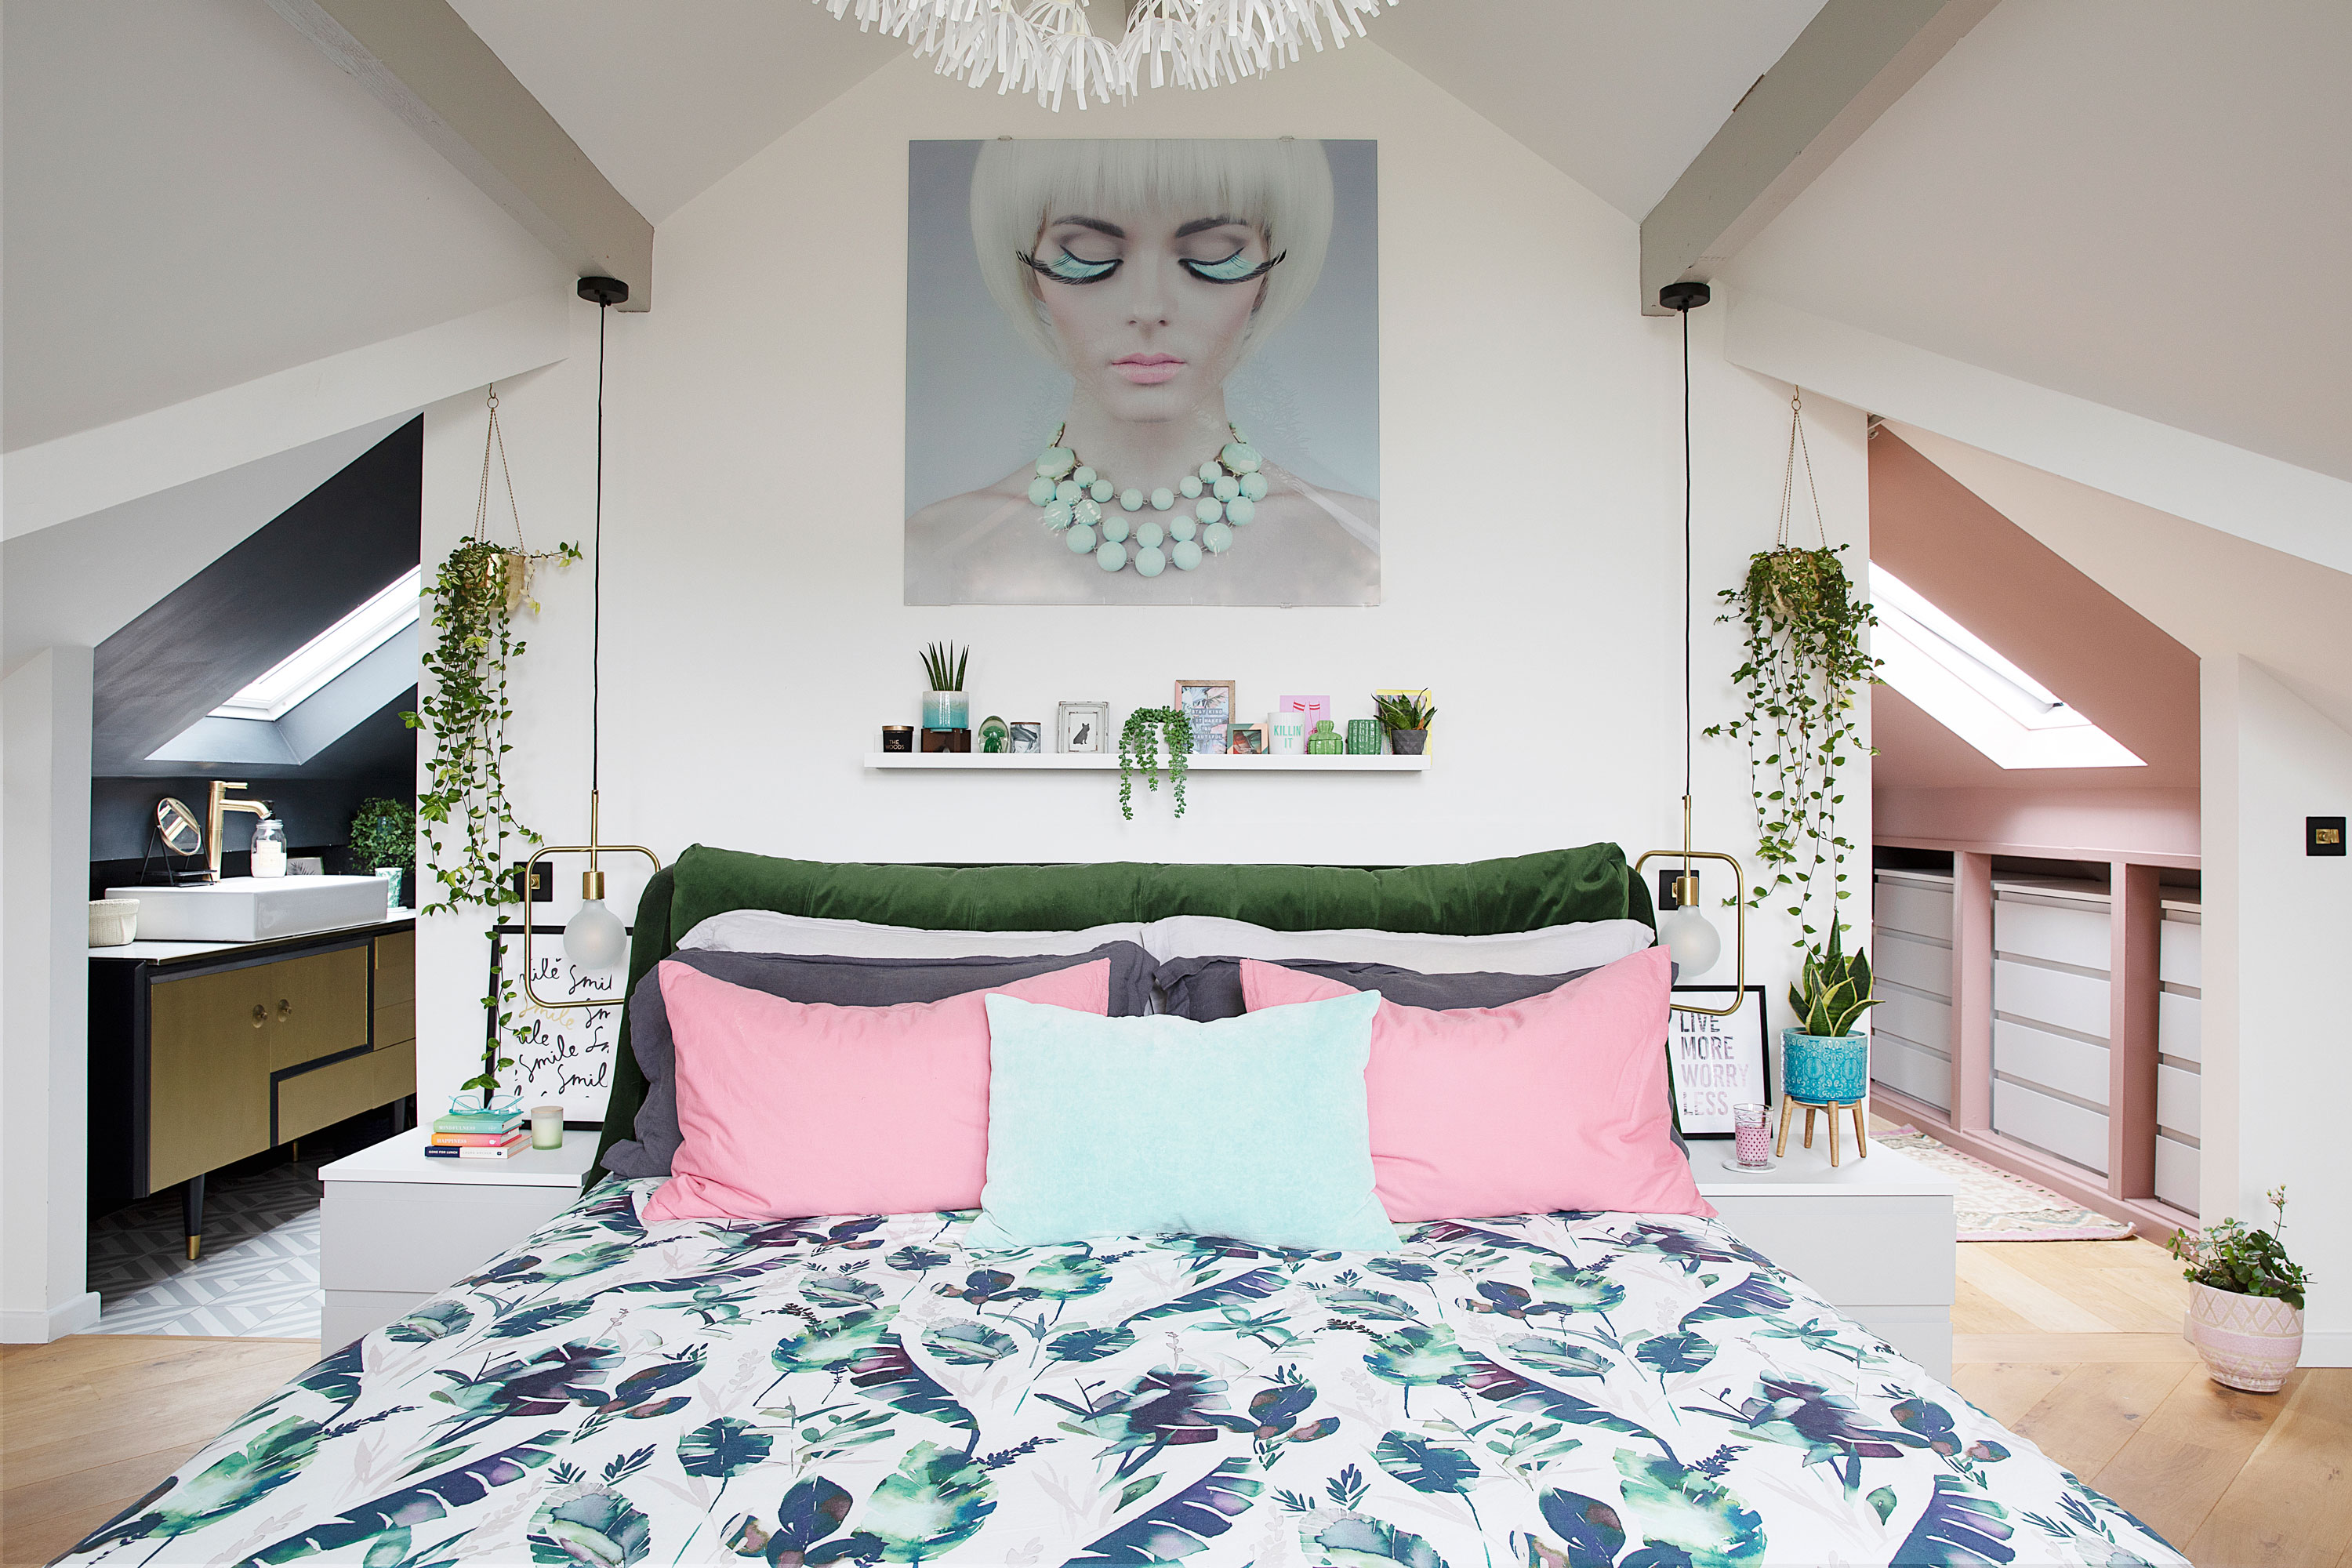 an eclectic loft bedroom with bed in the middle and a bathroom and wardrobe room to either side. January 2020: Debbie Goodwin set about lovingly renovating the bungalow her dad built